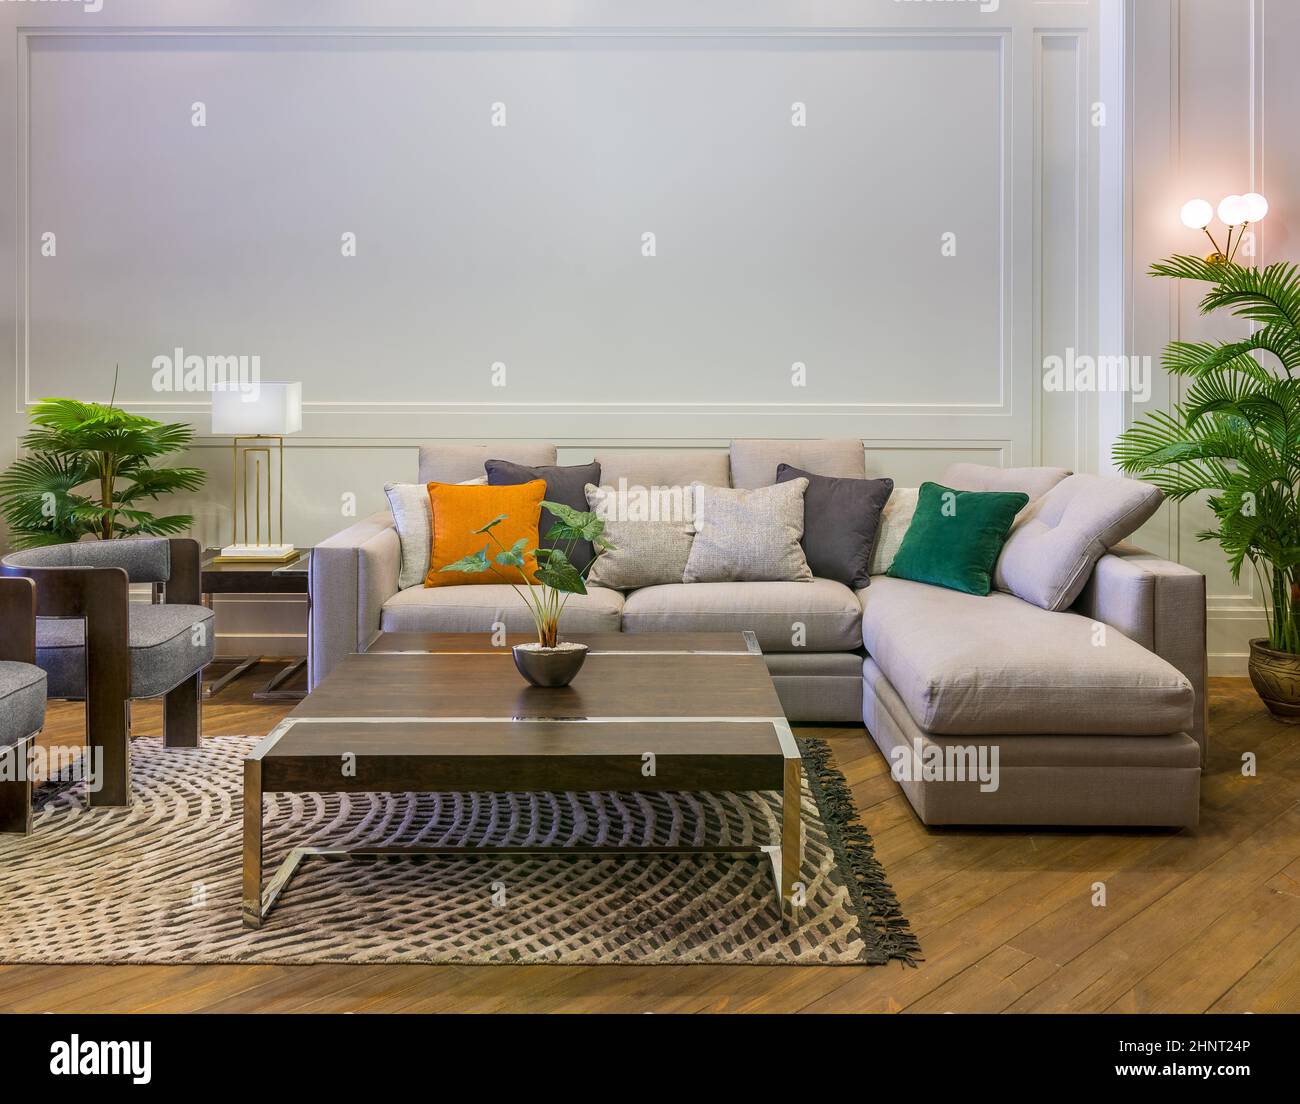 Gray sofa with colorful cushions placed and table on rug in spacious modern room with armchairs and green potted plants Stock Photo